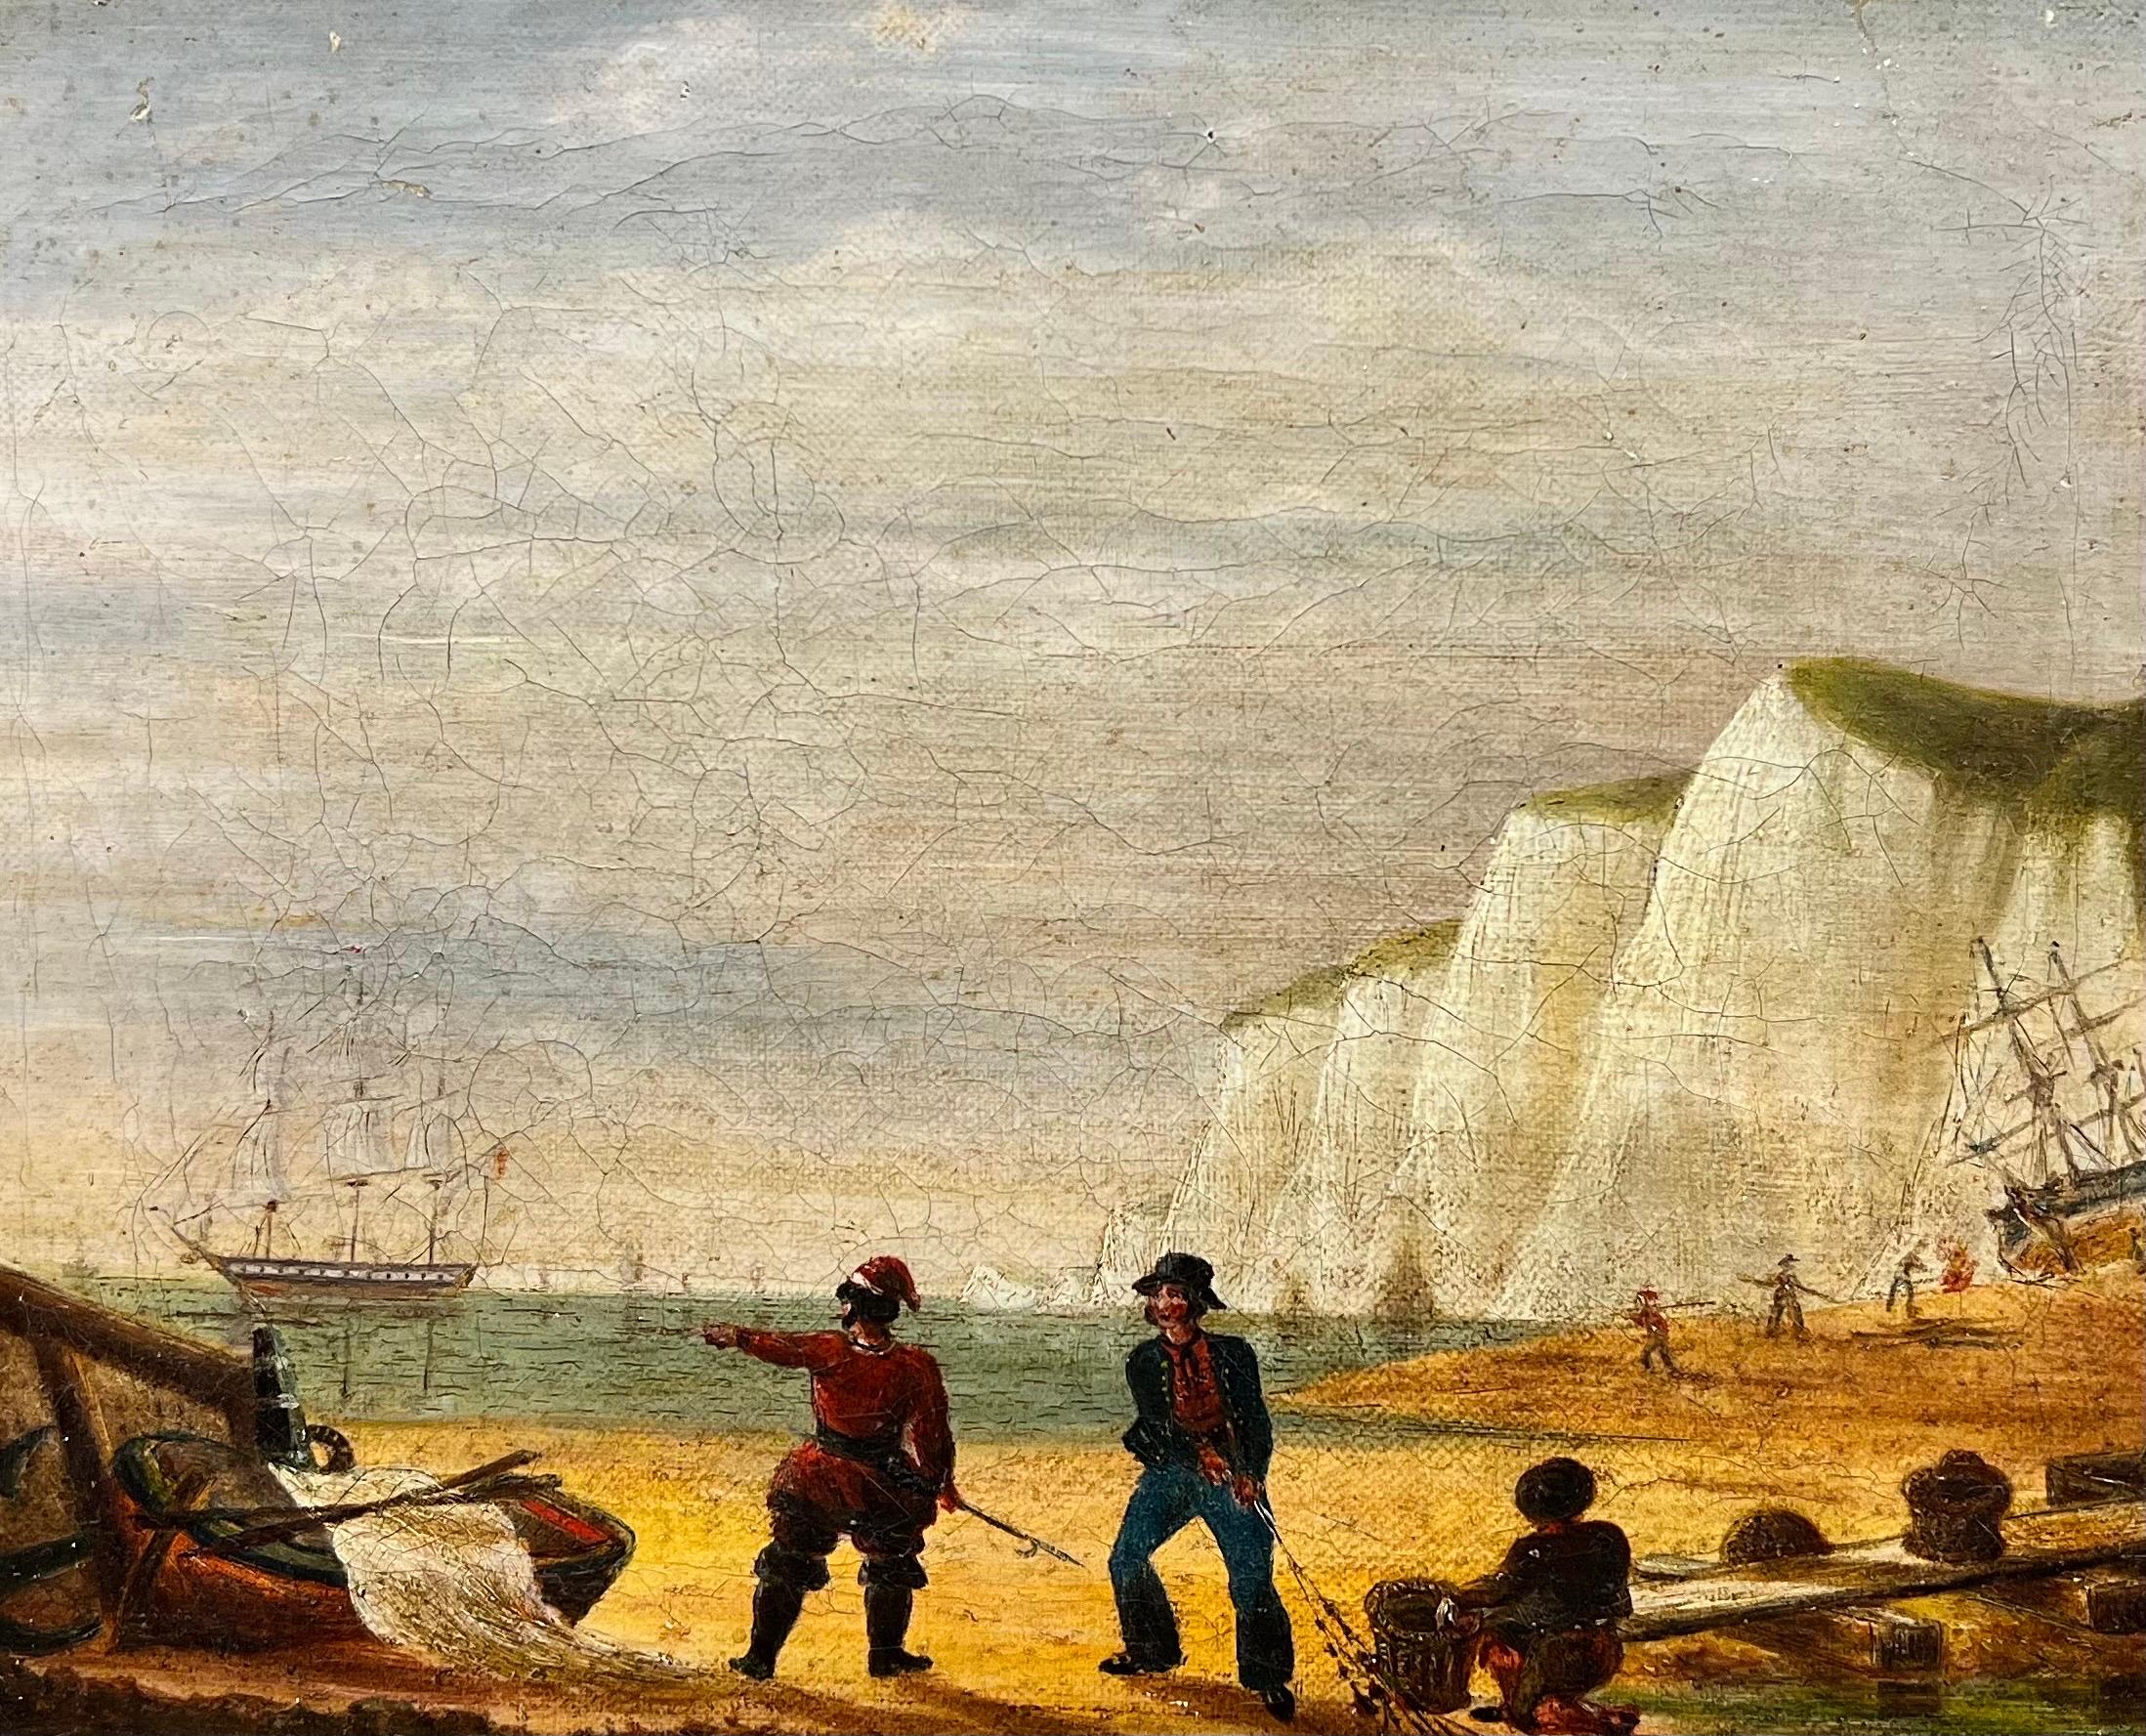 1800's English Figurative Painting - Napoleonic Wars Marine 1800's Oil Painting Soldiers on Beach War Ship at Sea